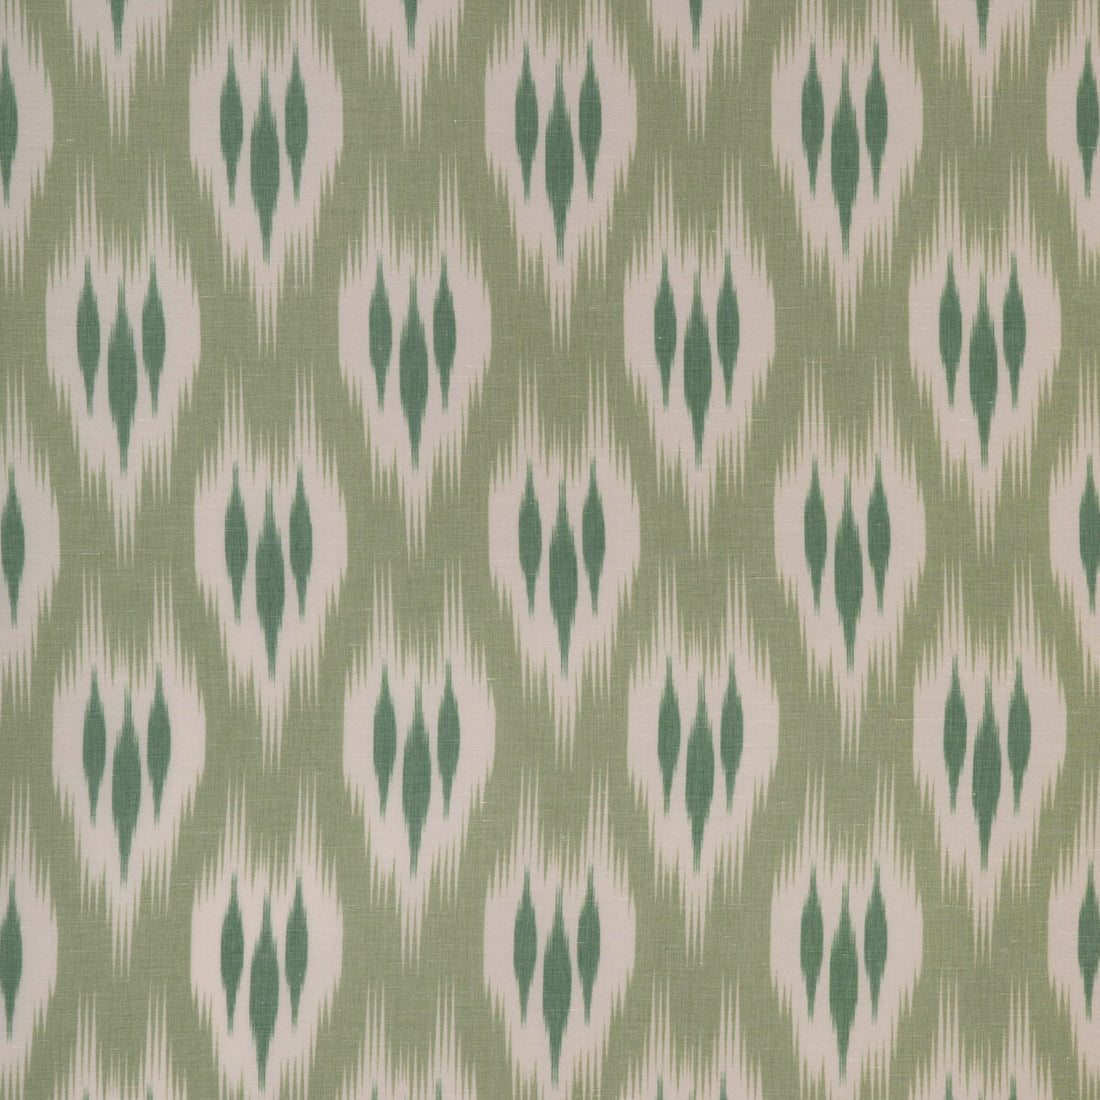 Clare Print fabric in moss color - pattern 2023102.33.0 - by Lee Jofa in the Clare Prints collection